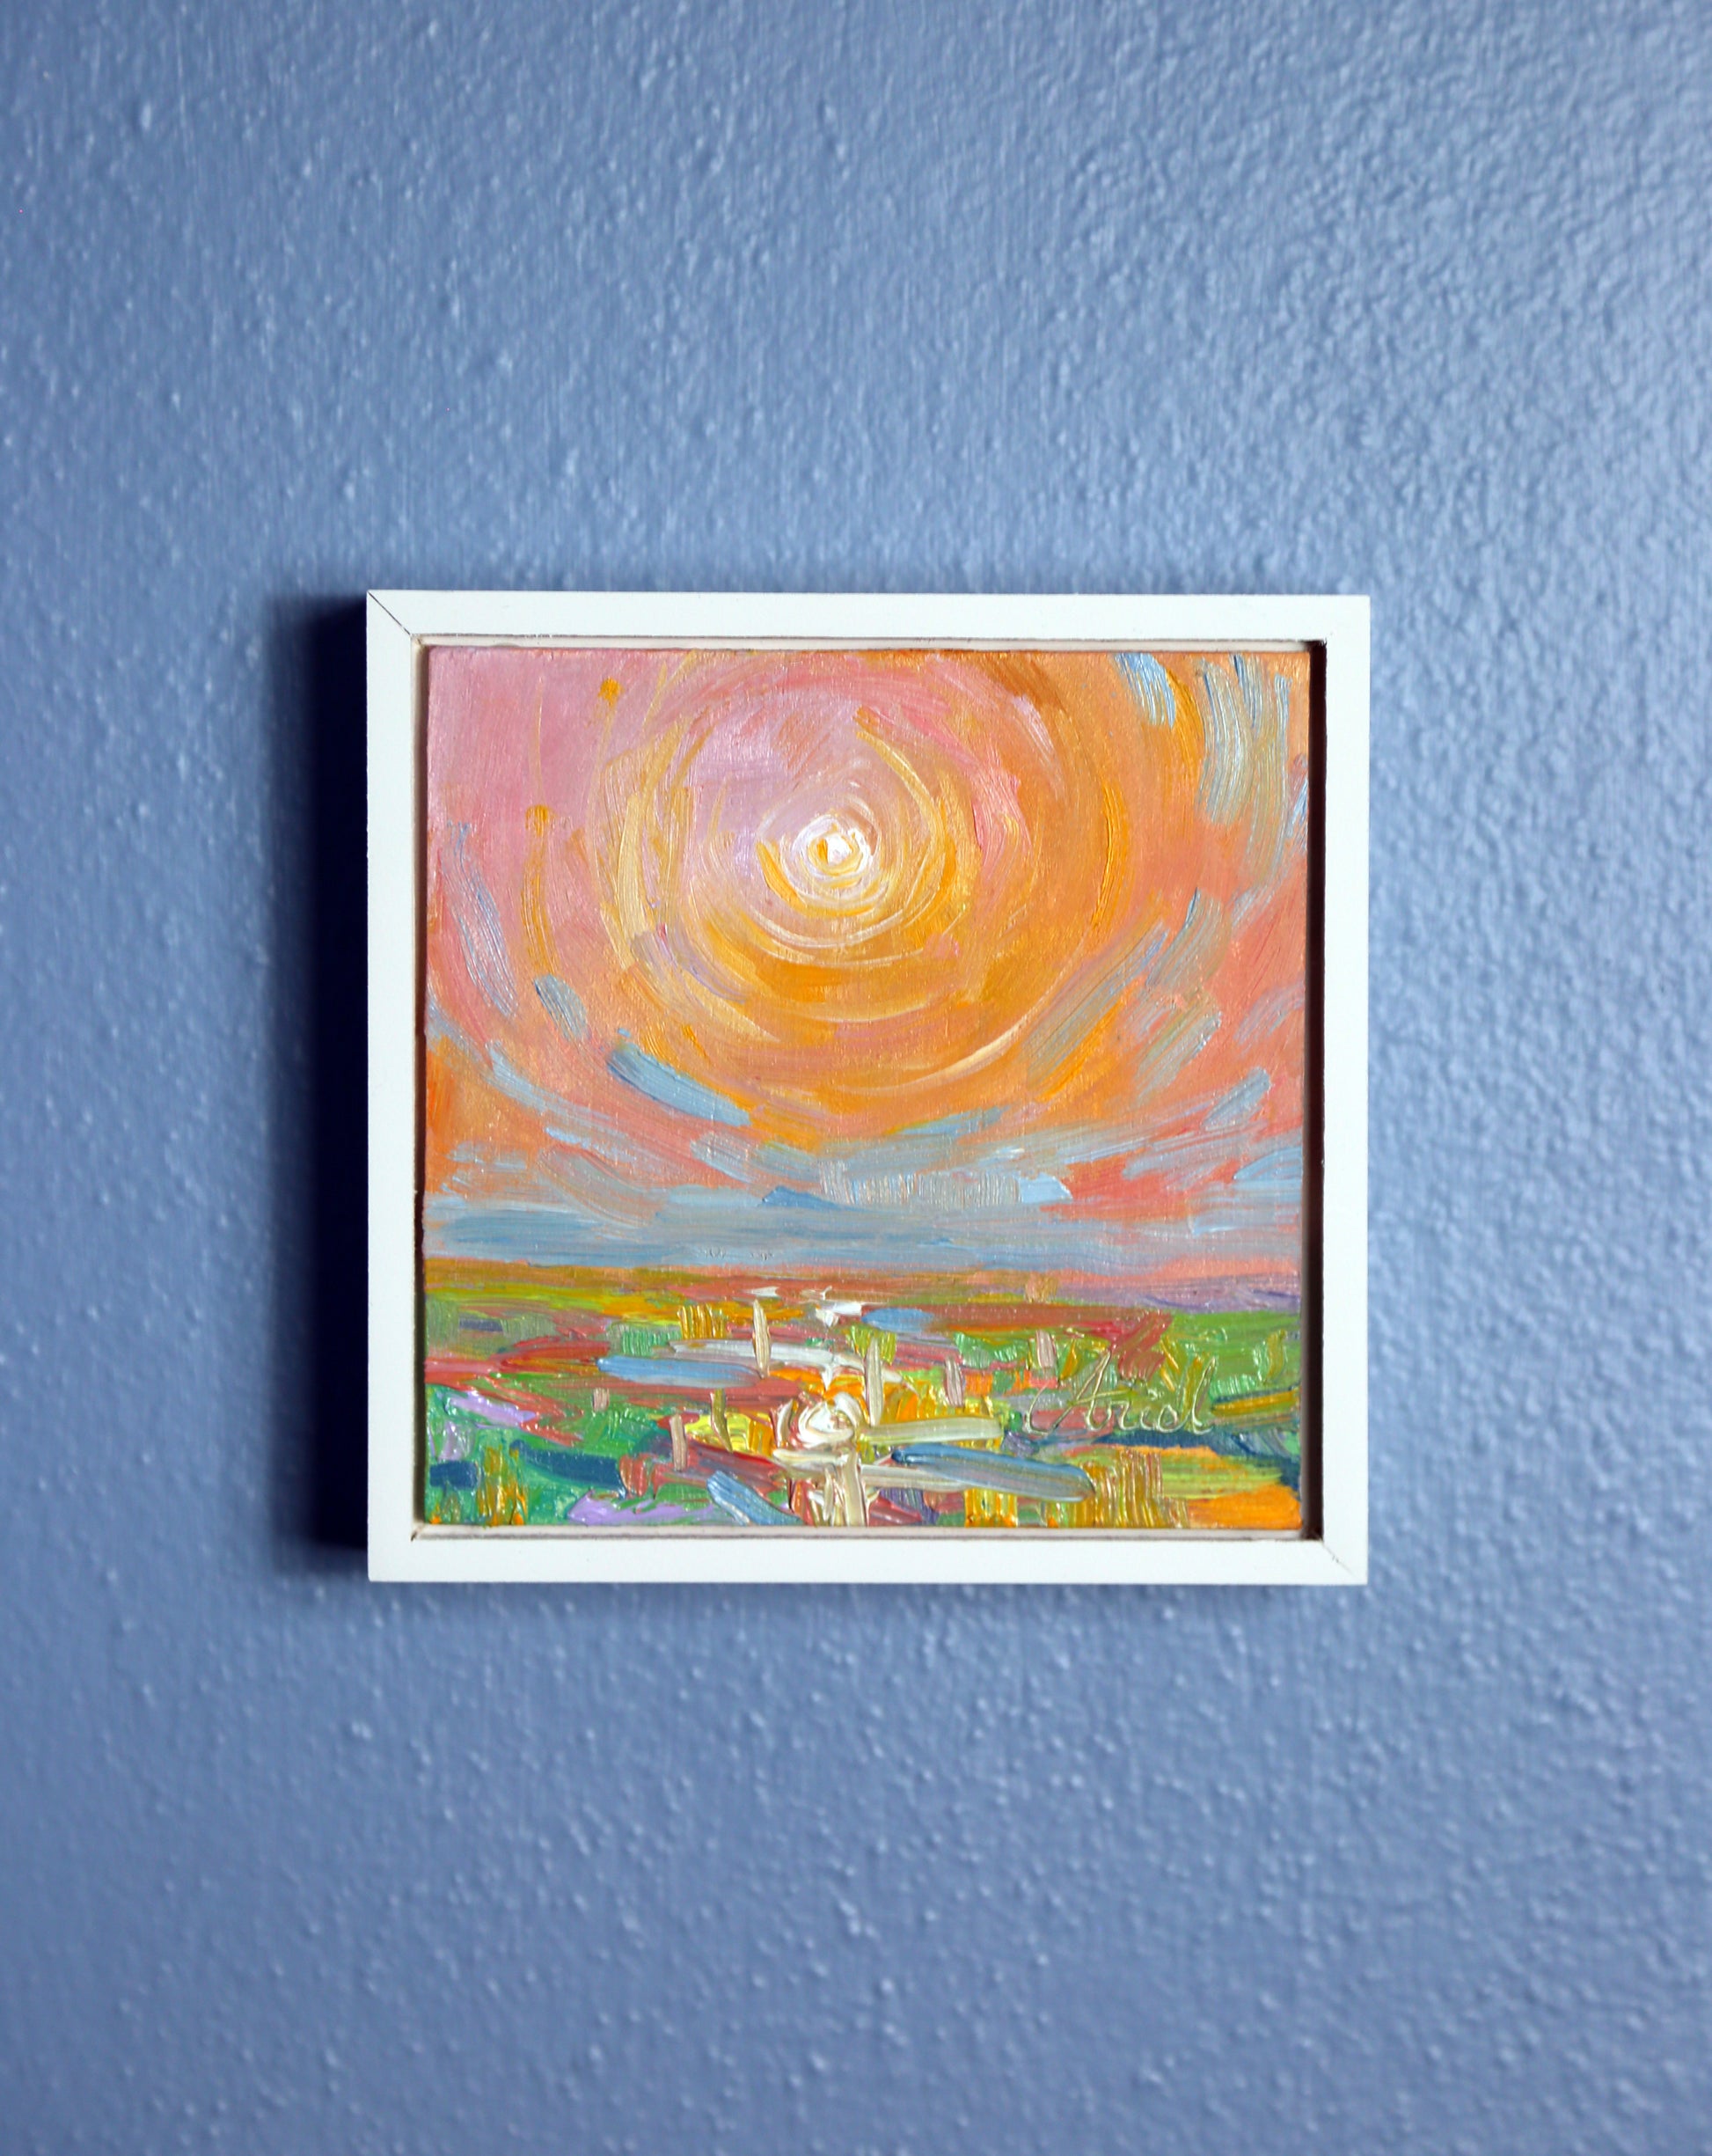 Abstract contemporary landscape original fine art vibrant bright color expressive artwork impressionism oil painting artwork local Jacksonville Florida small business woman owned business marsh small petite mini 